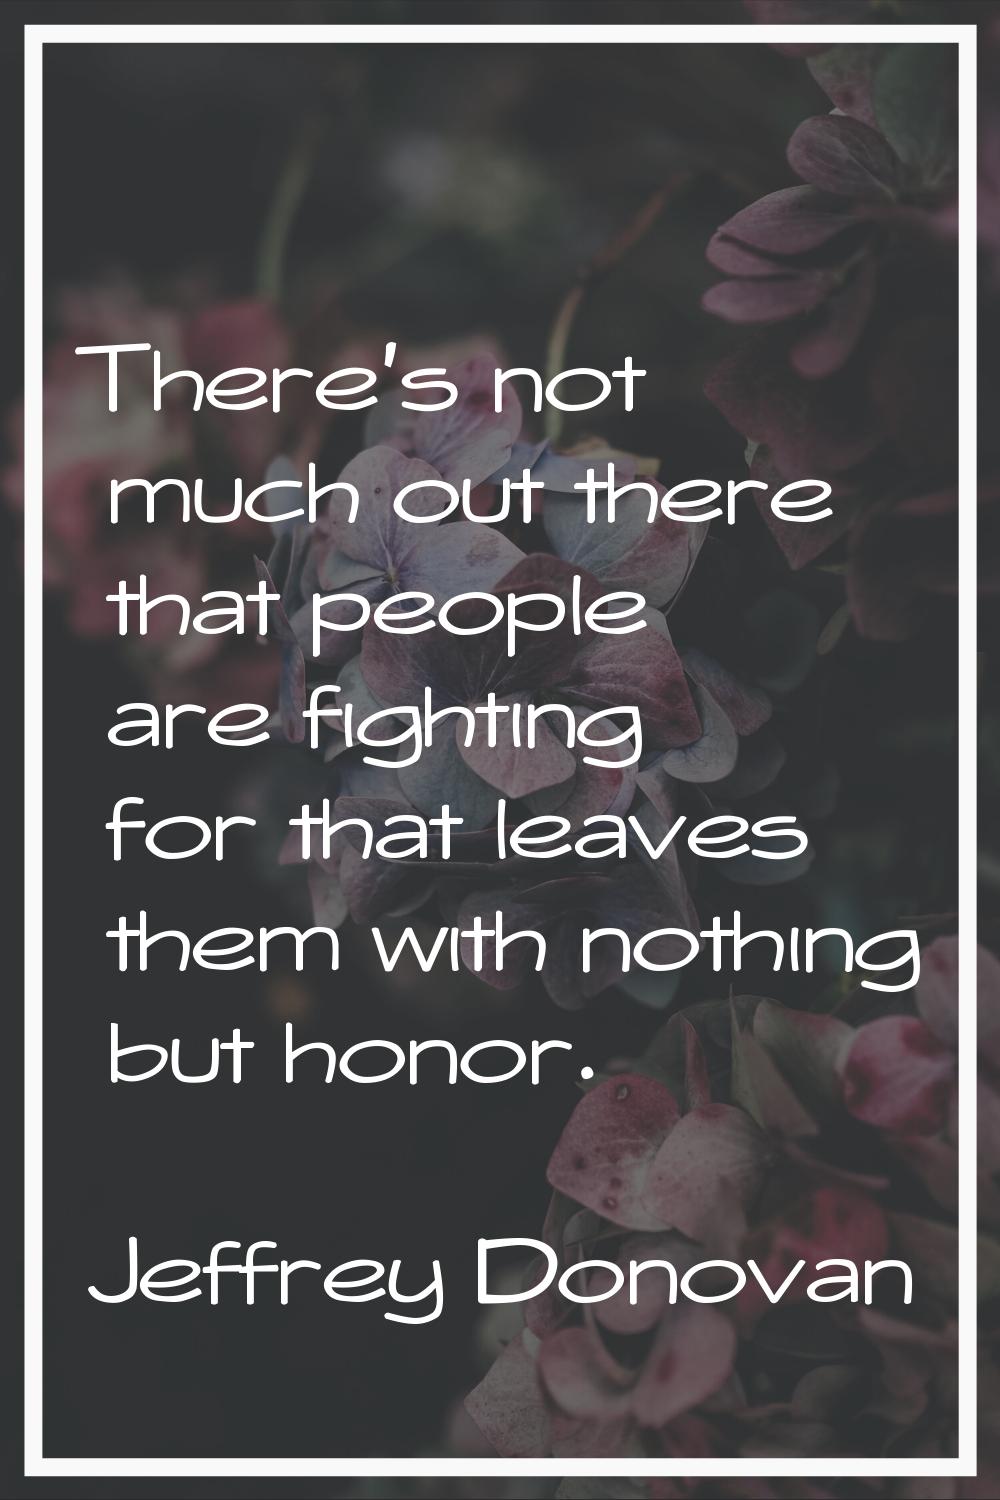 There's not much out there that people are fighting for that leaves them with nothing but honor.